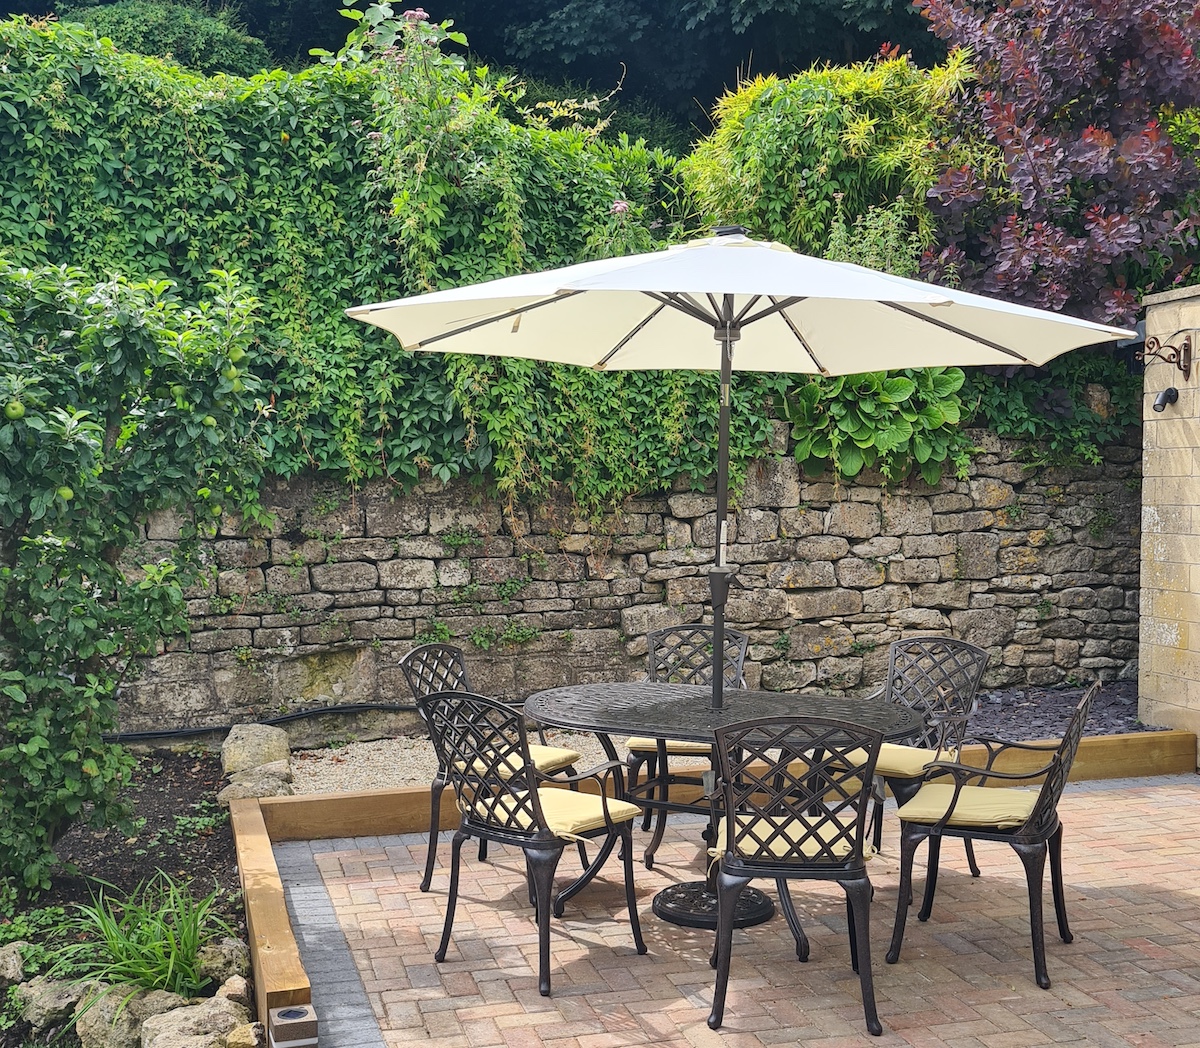 How do you measure your patio for a garden table and 6 garden chairs?